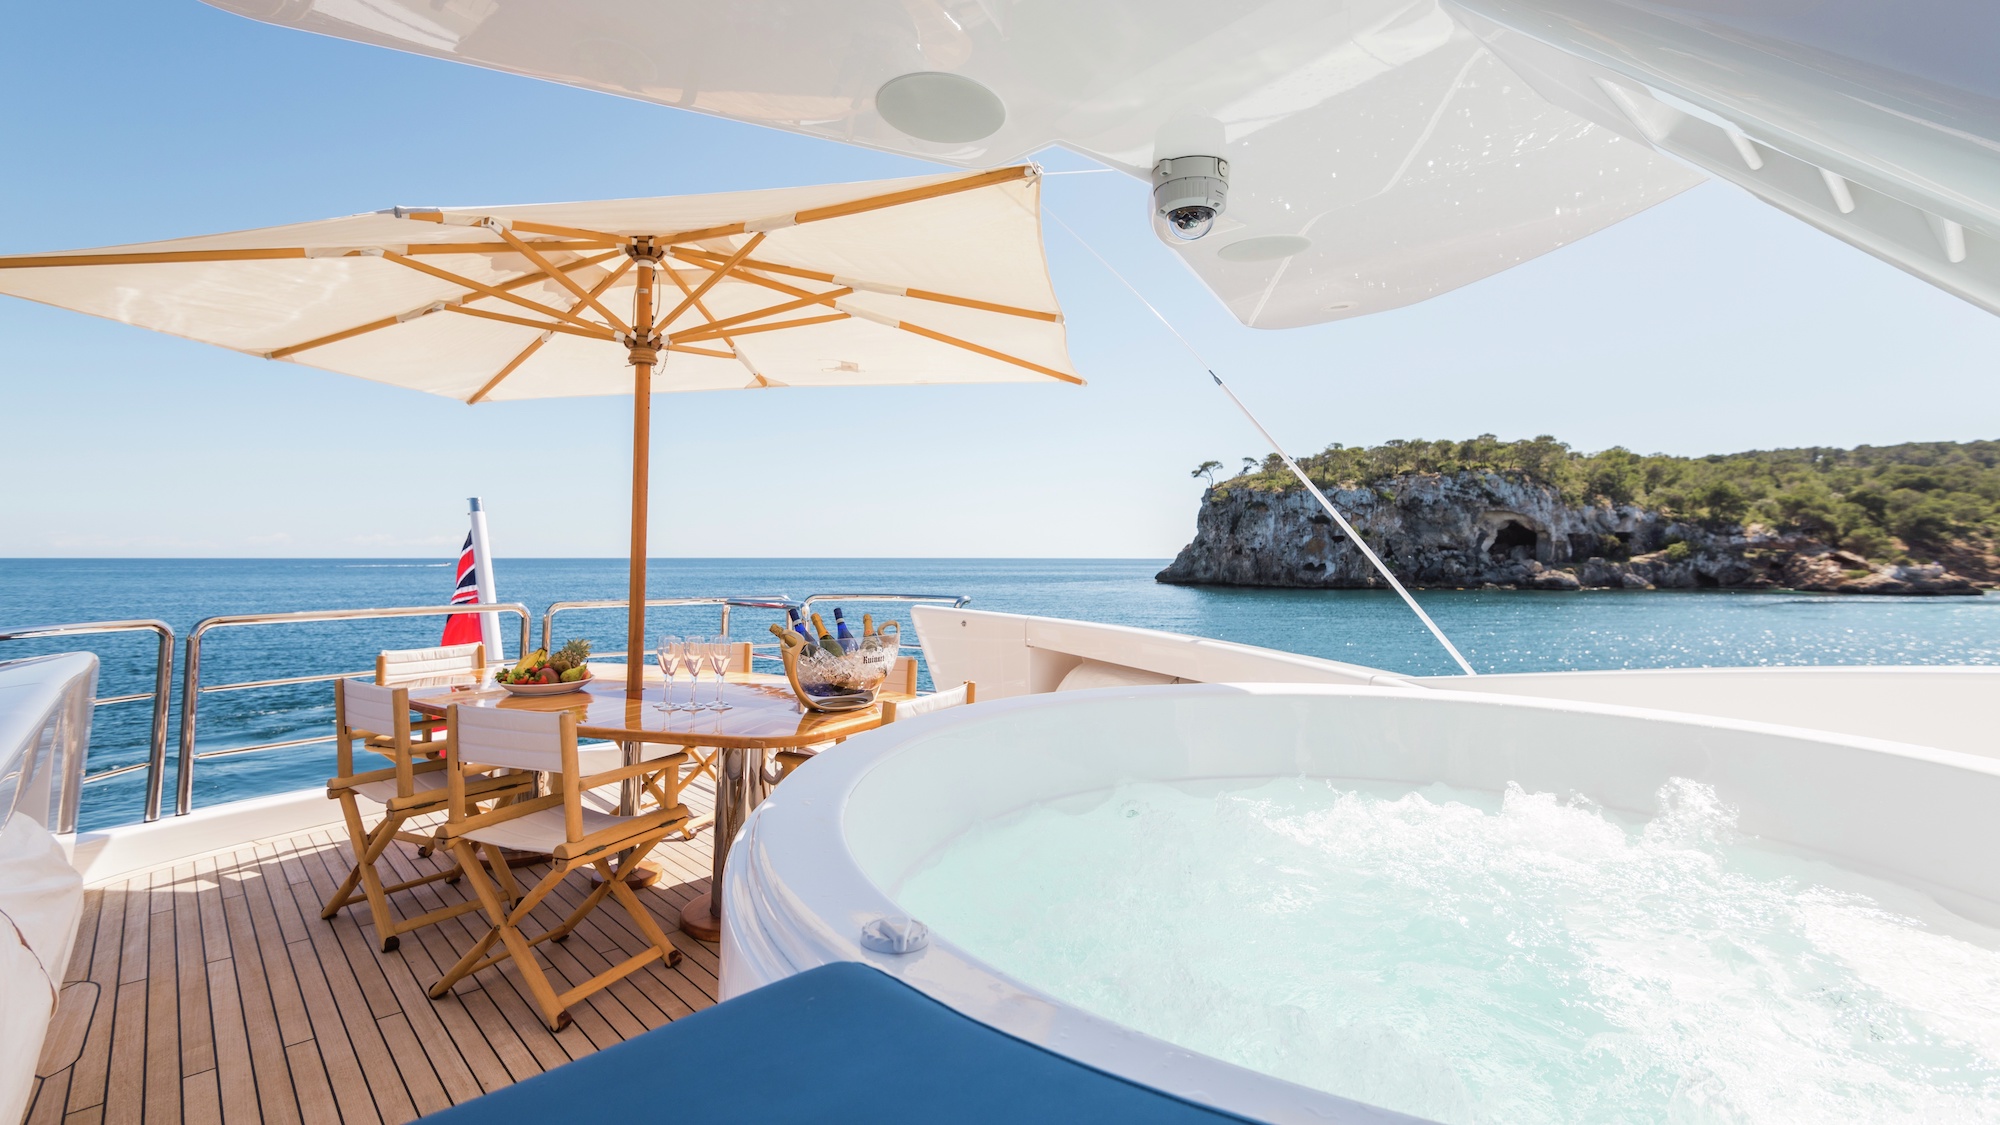 Onboard Jacuzzi And Alfresco Dining Area